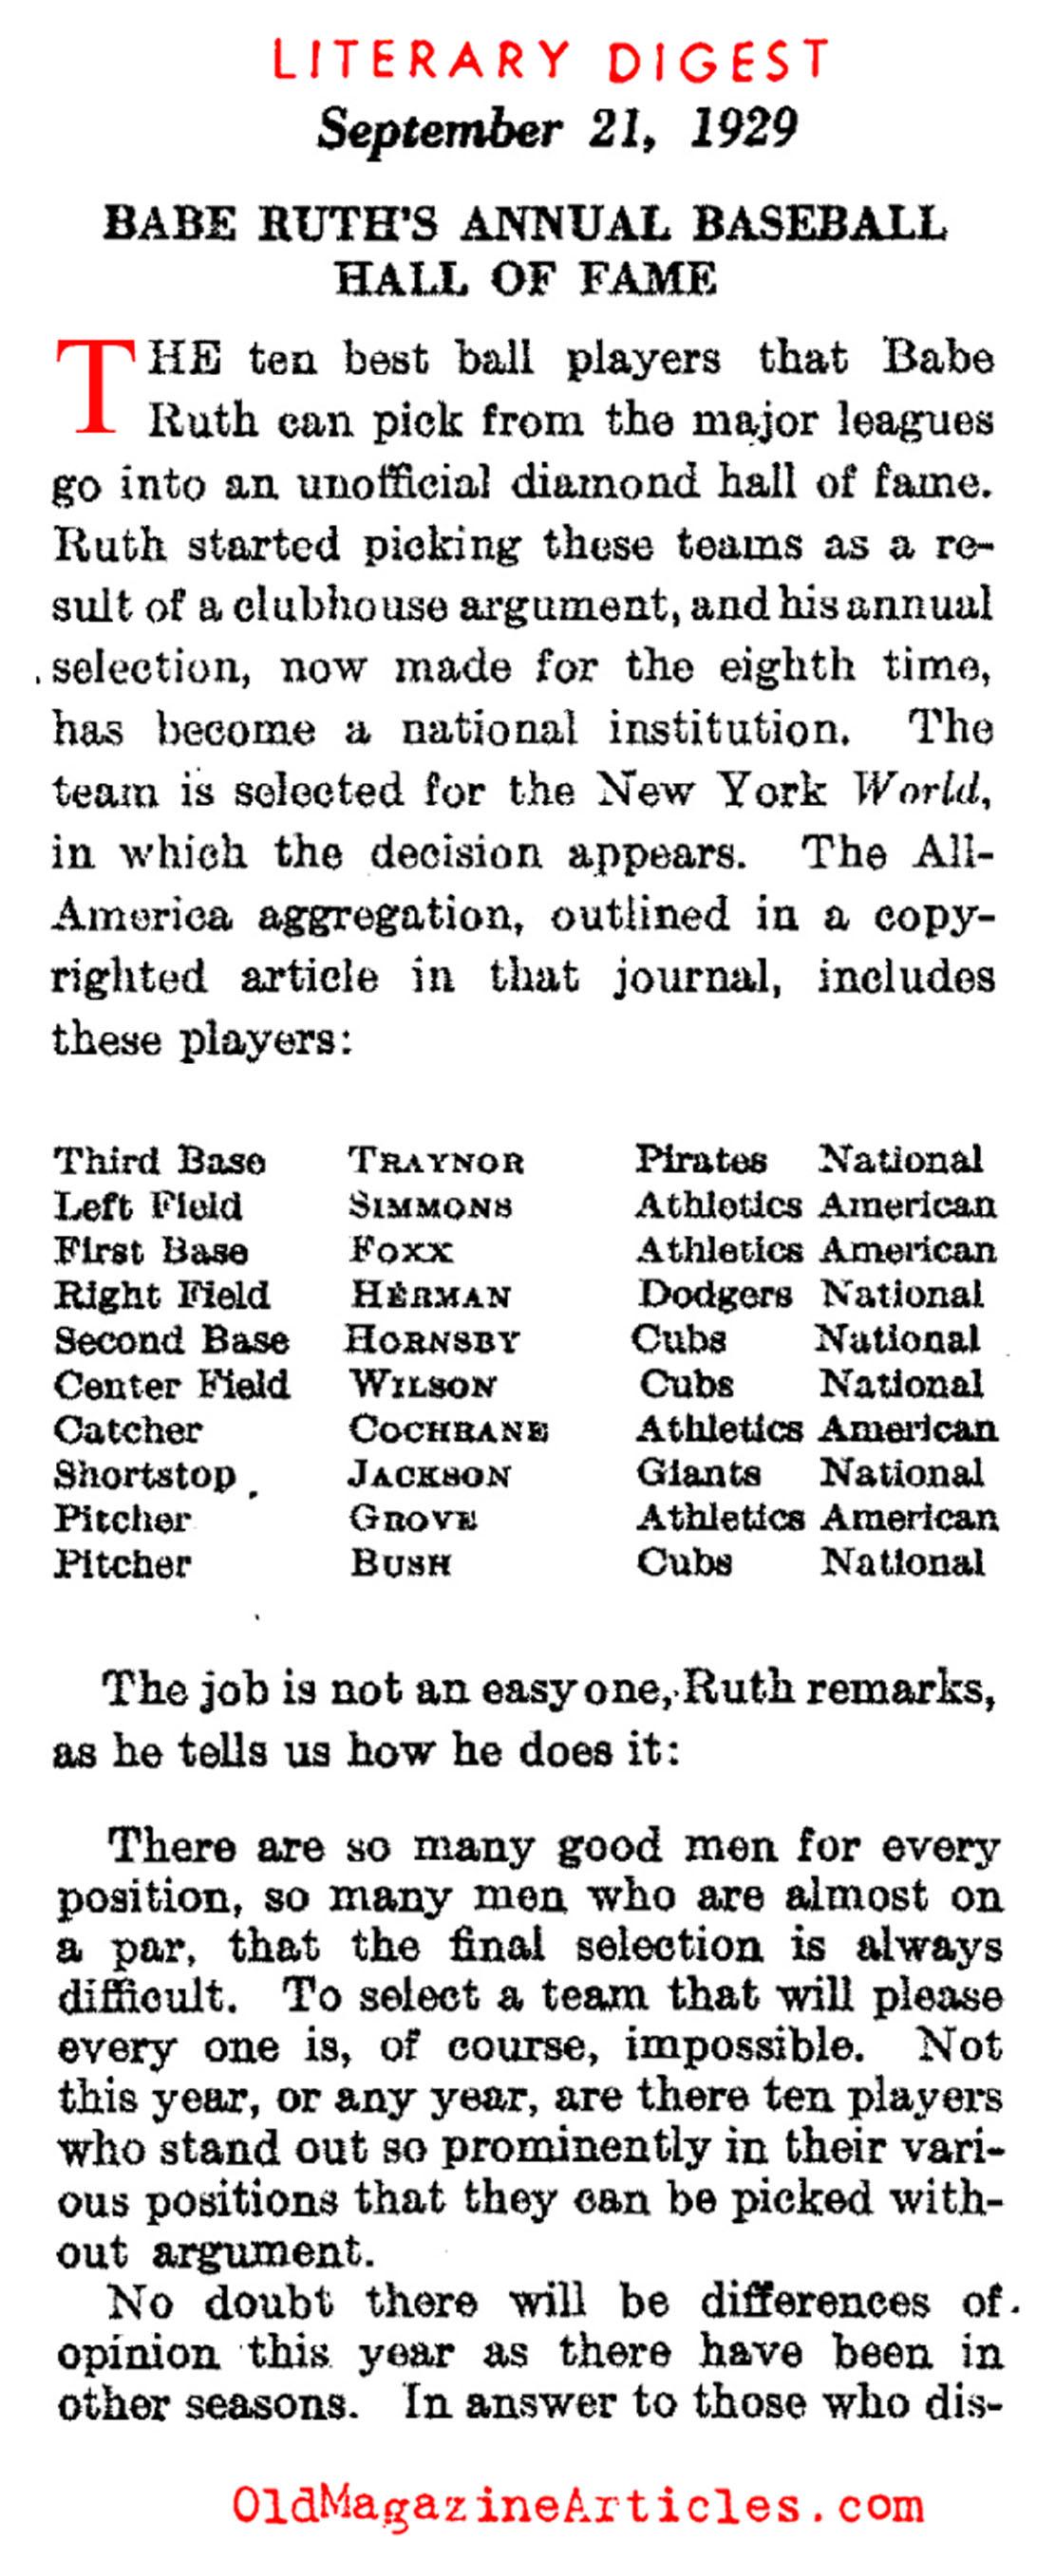 Babe Ruth Ranks and his Peers (Literary Digest, 1929)